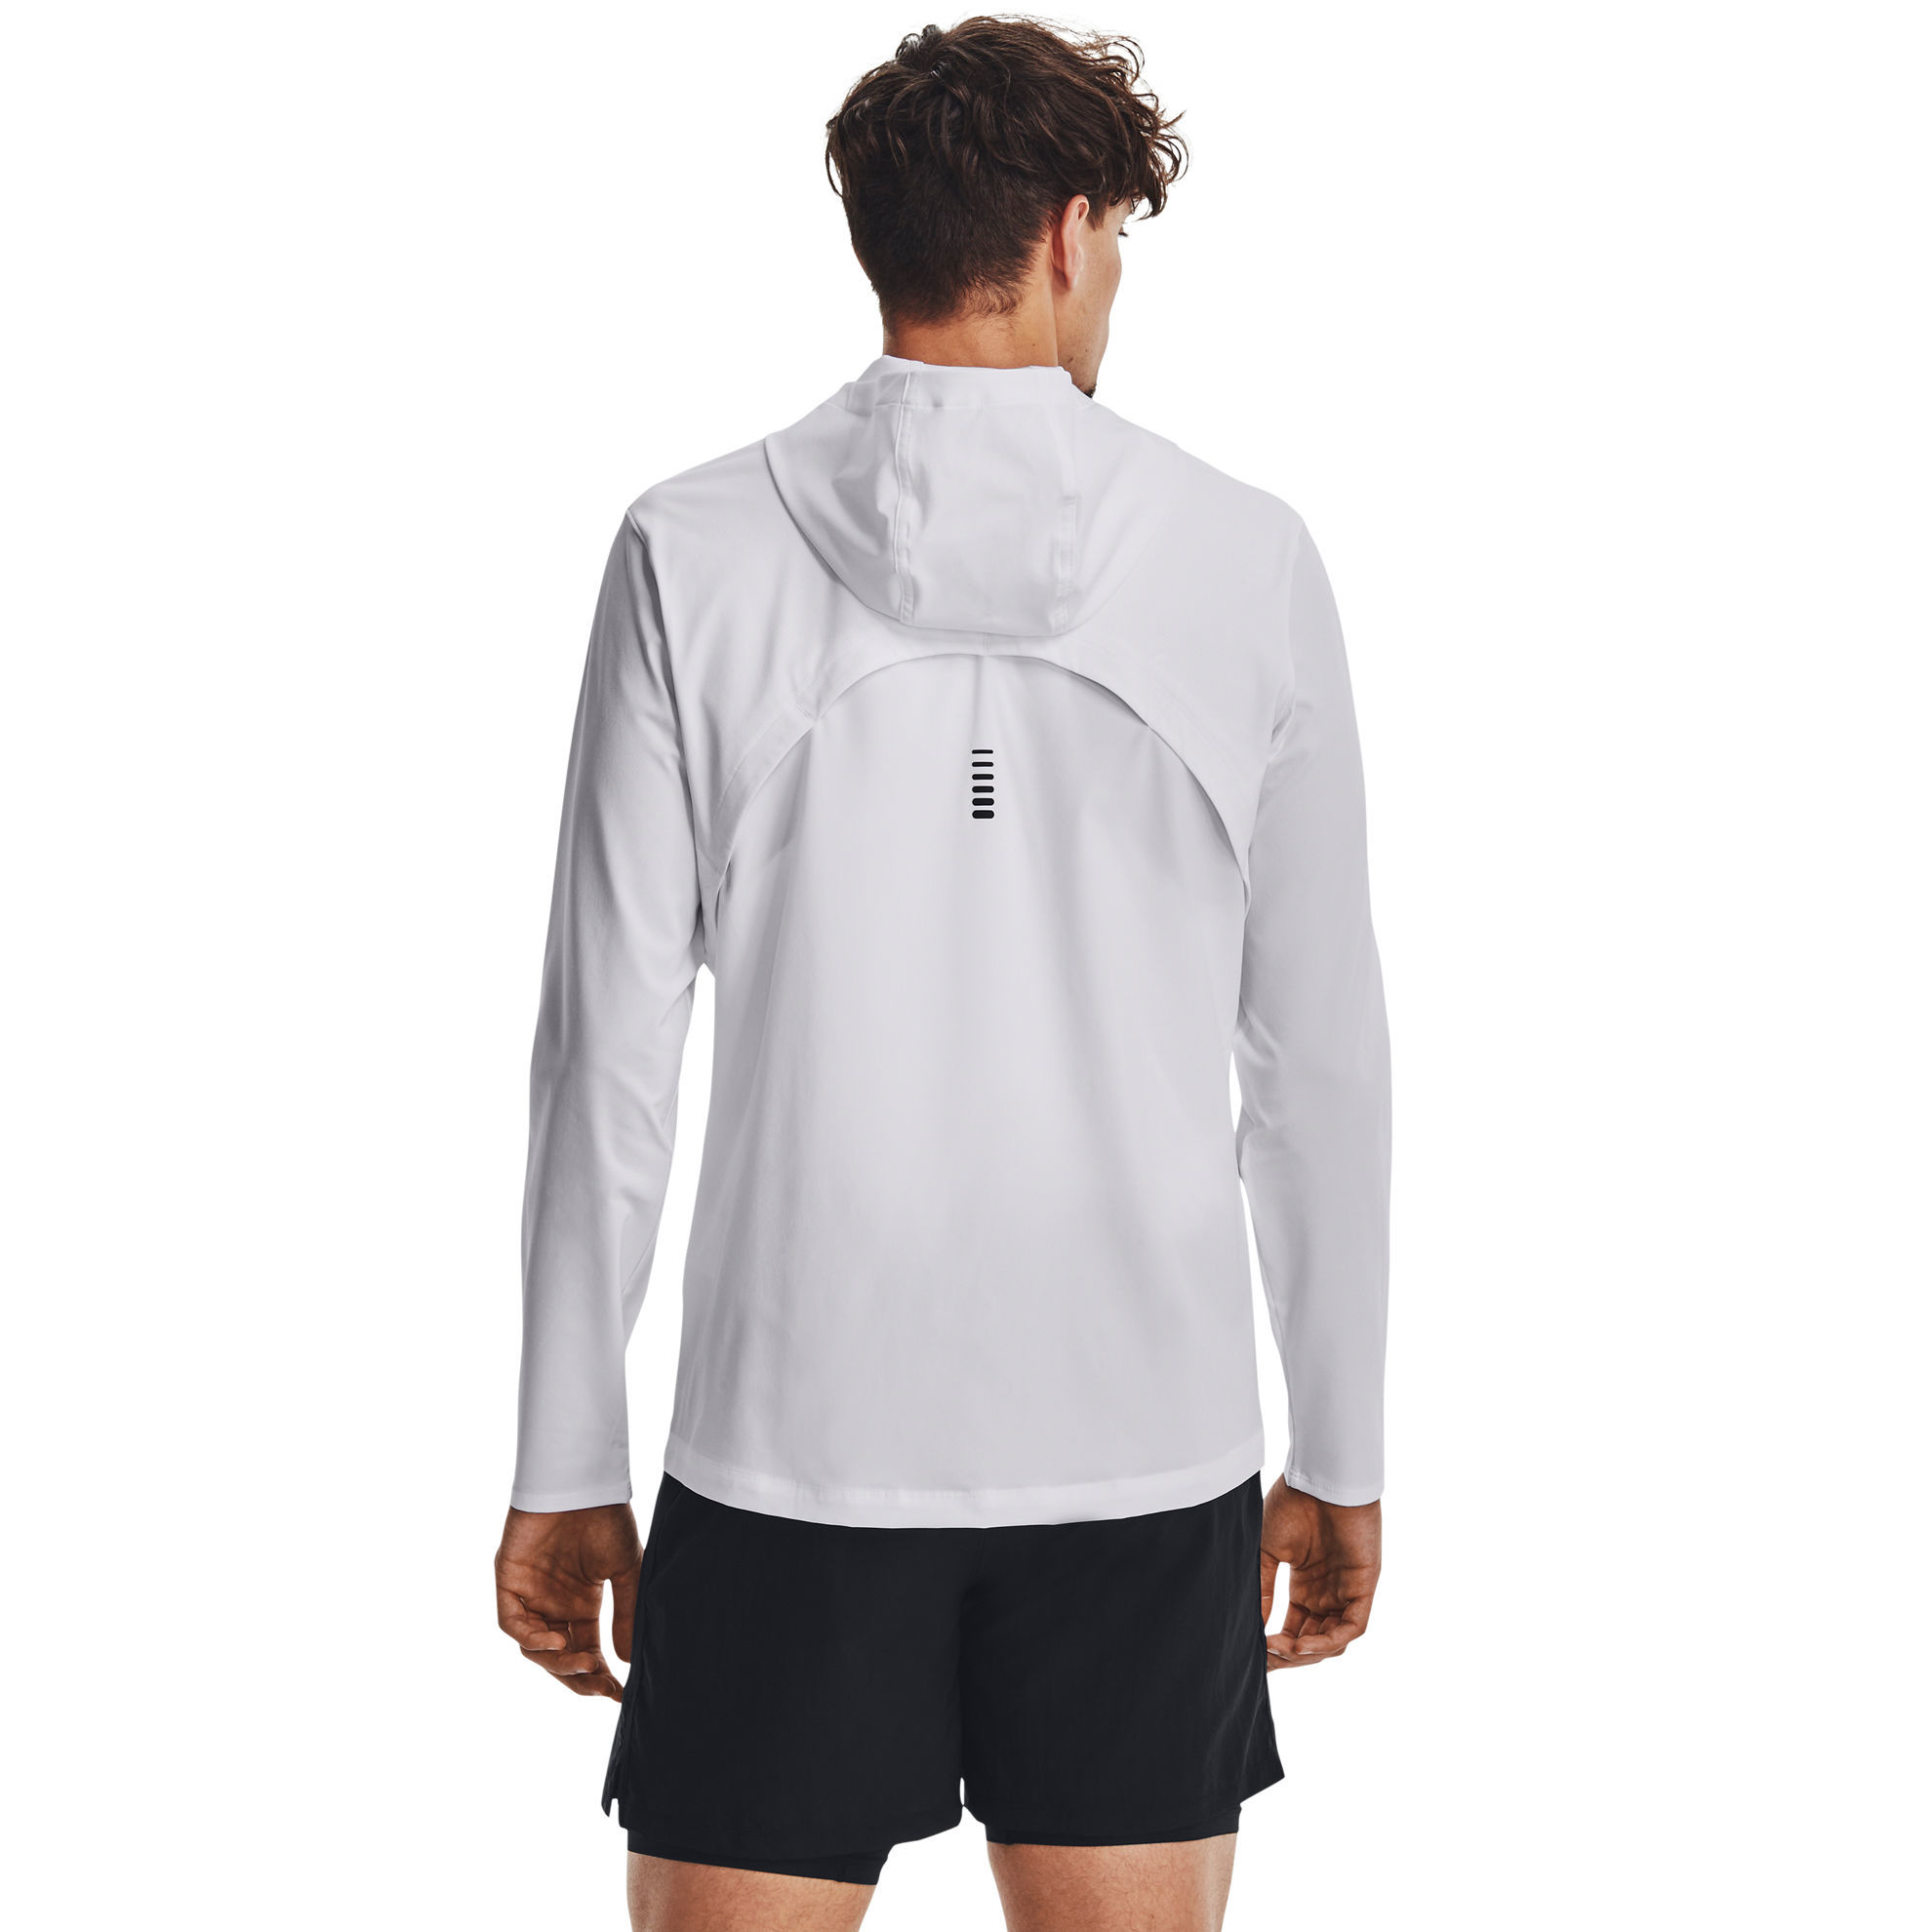 Under Armour Outrun the Storm Jacket White - Löparjacka, Herr